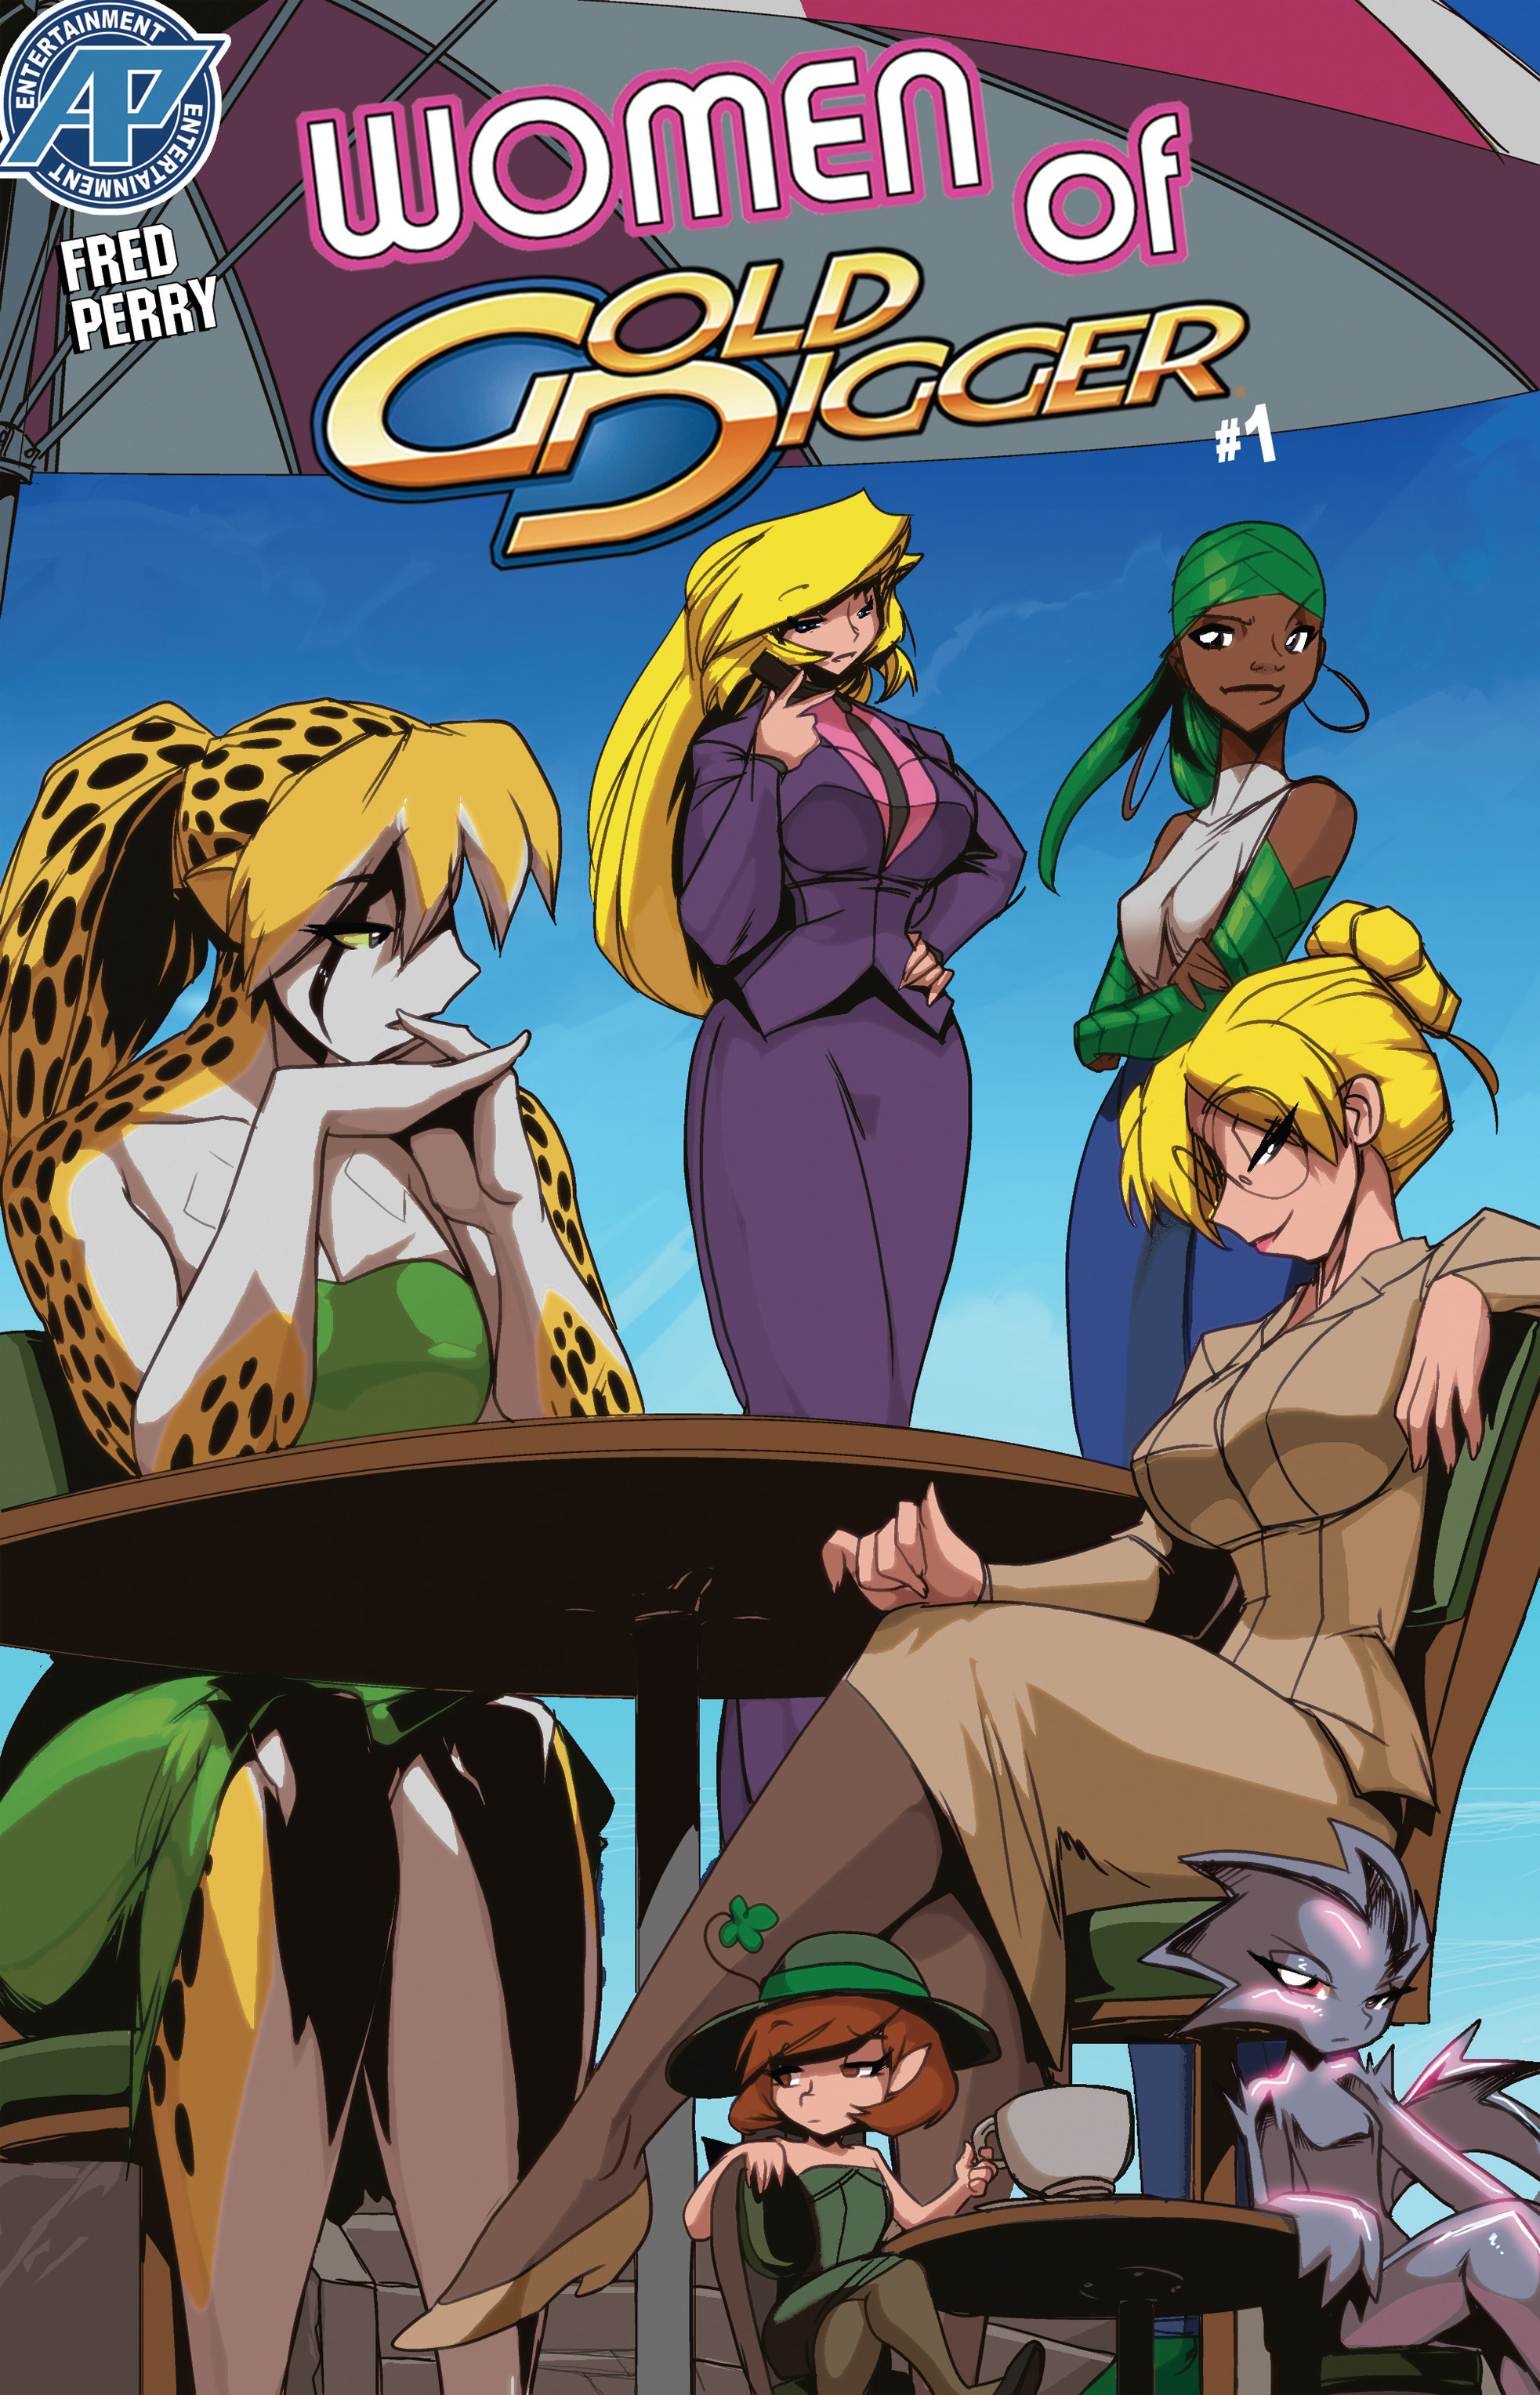 Read online Women of Gold Digger comic -  Issue # TPB - 5